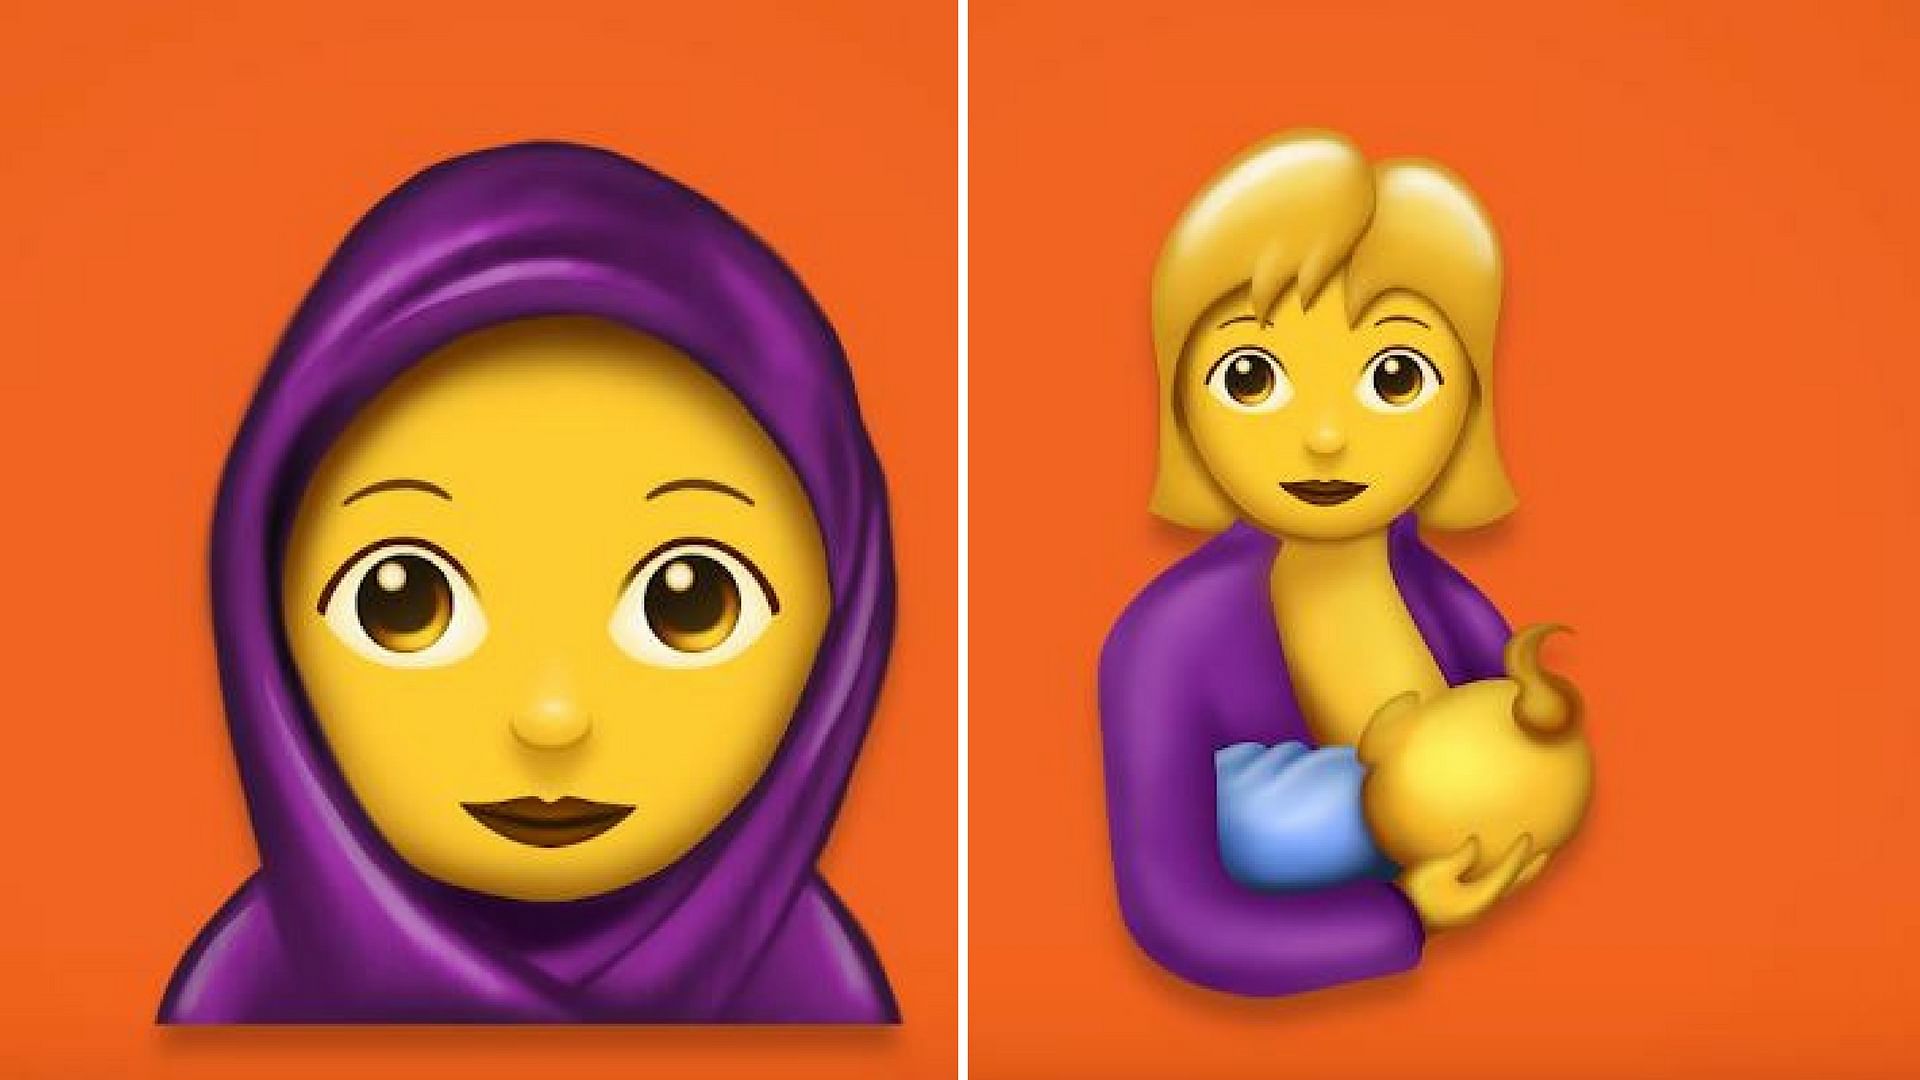 Two of the new emojis approved by Unicode. (Photo Courtesy: Youtube/<a href="https://www.youtube.com/channel/UCcCv5GFz0sSQwHekeXmHpww">Emojipedia</a>)